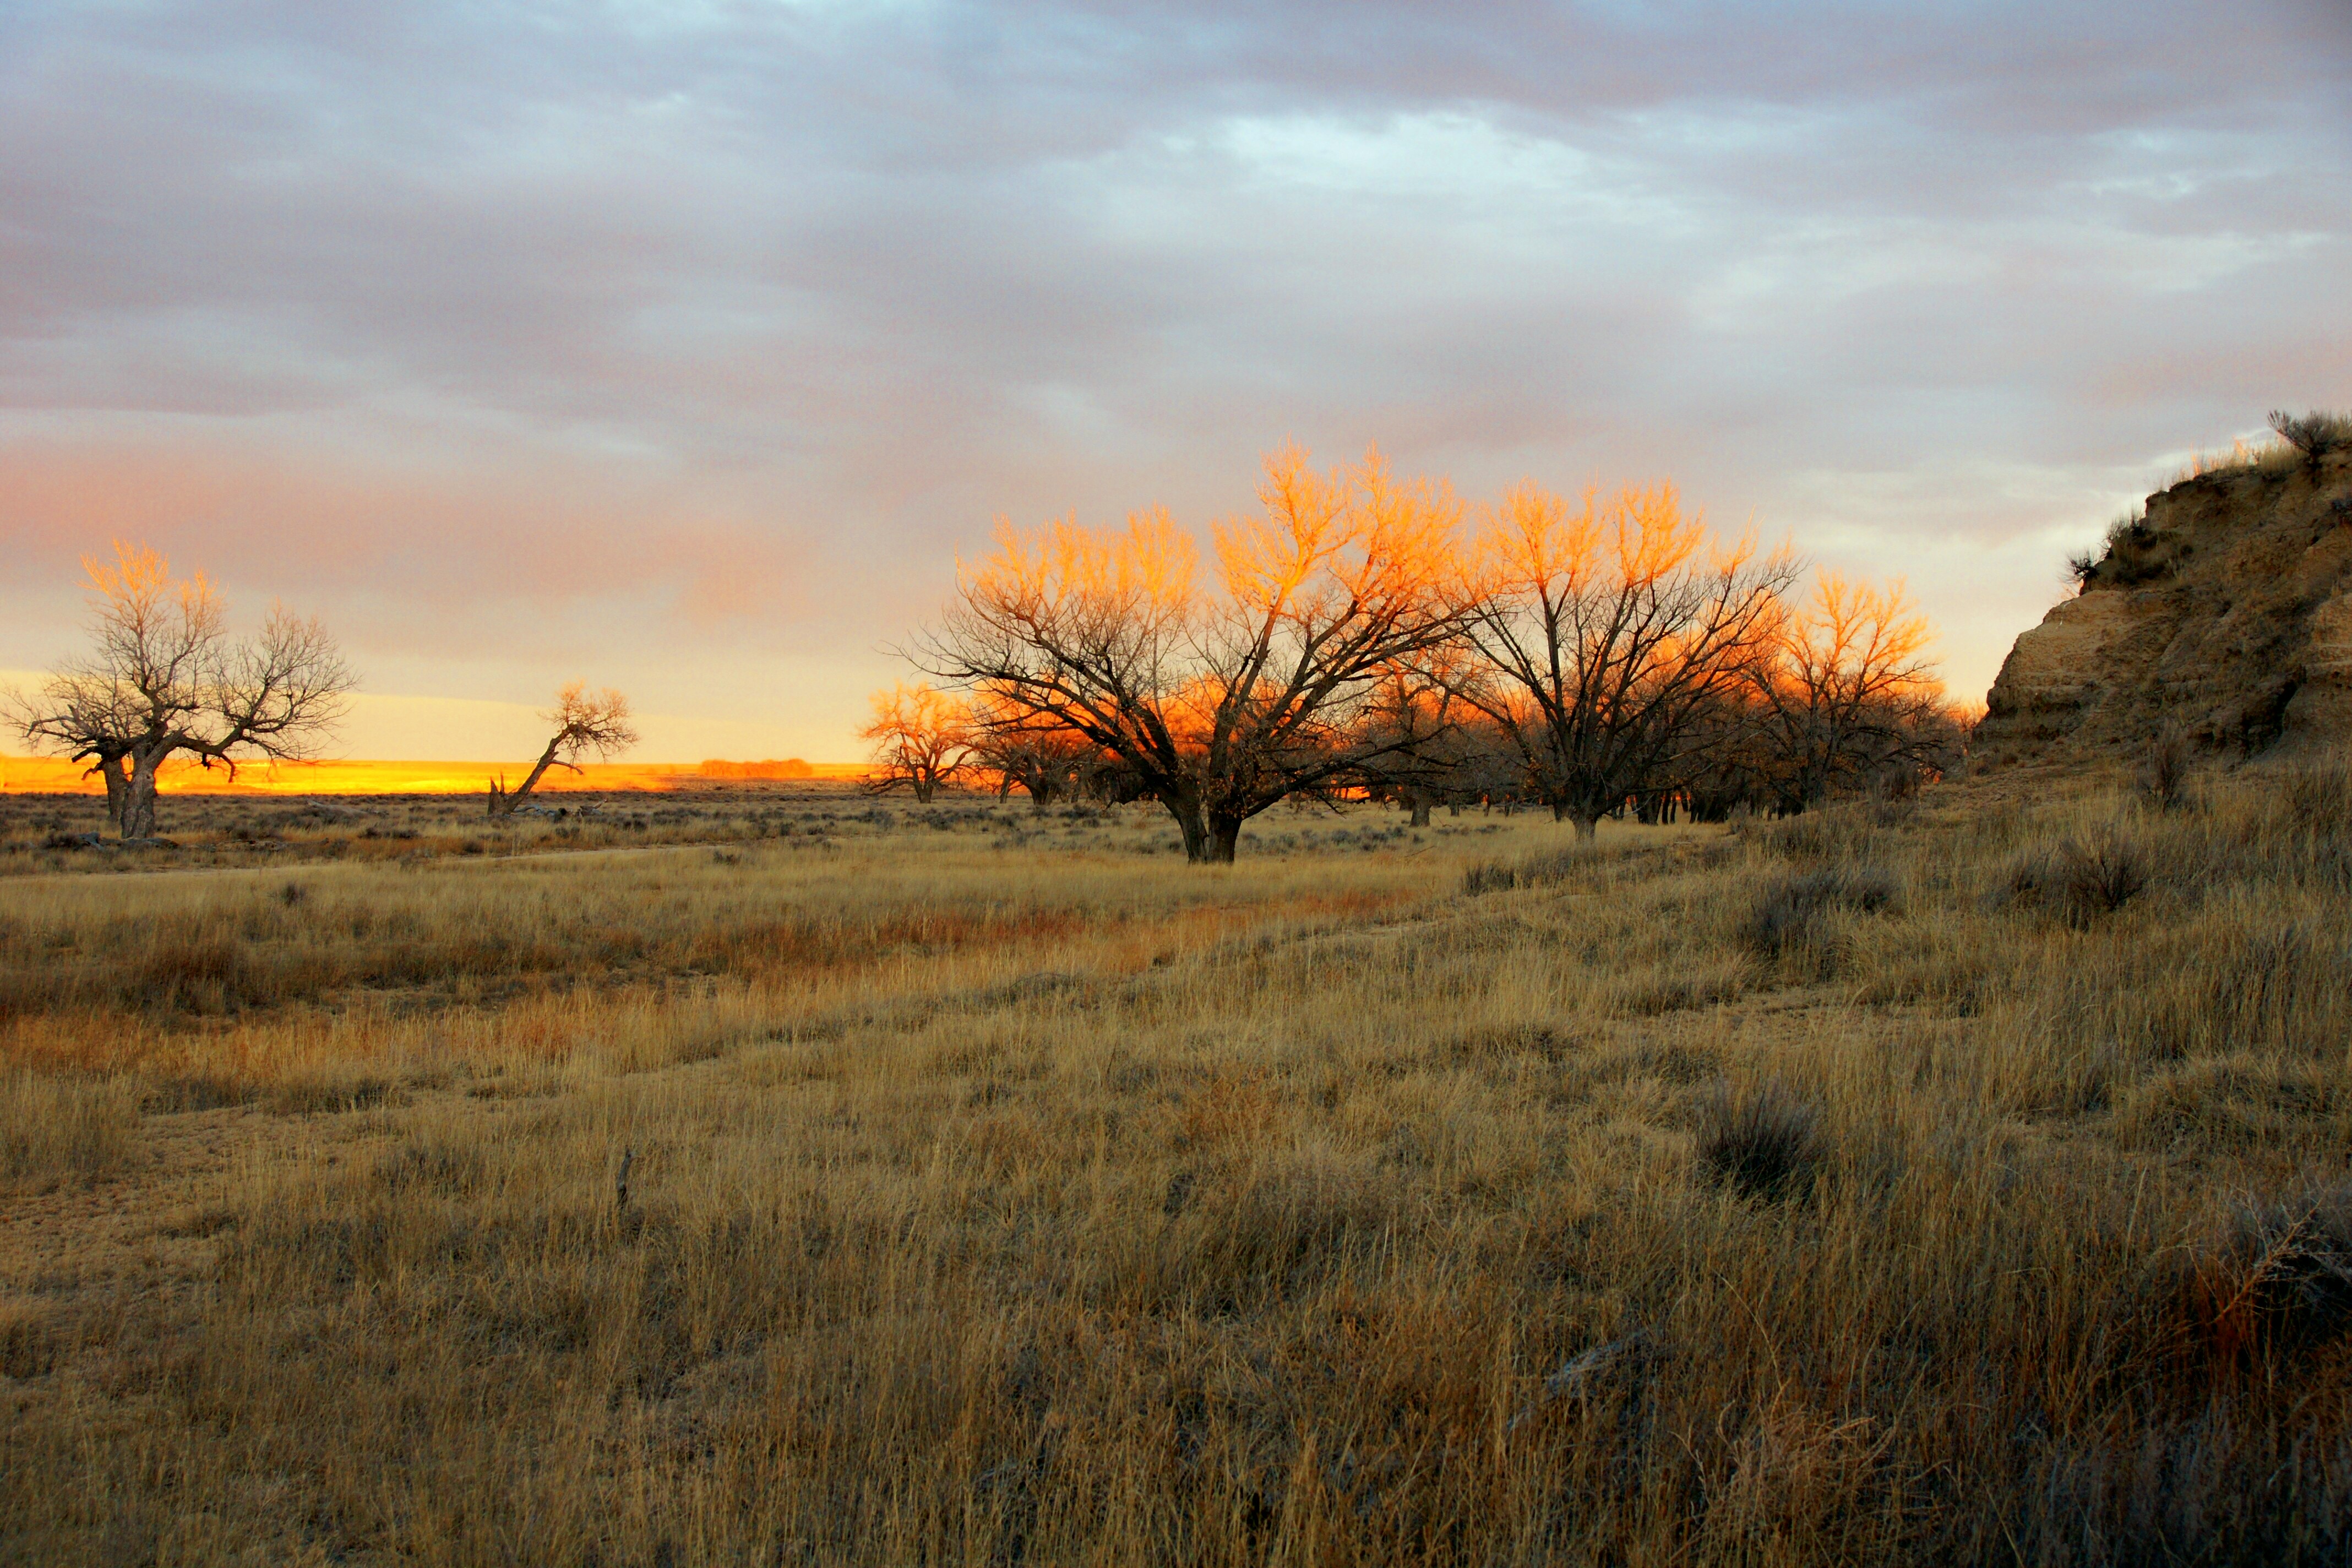 The uppermost branches of leafless trees in a grassy plain are lit by the setting sun.